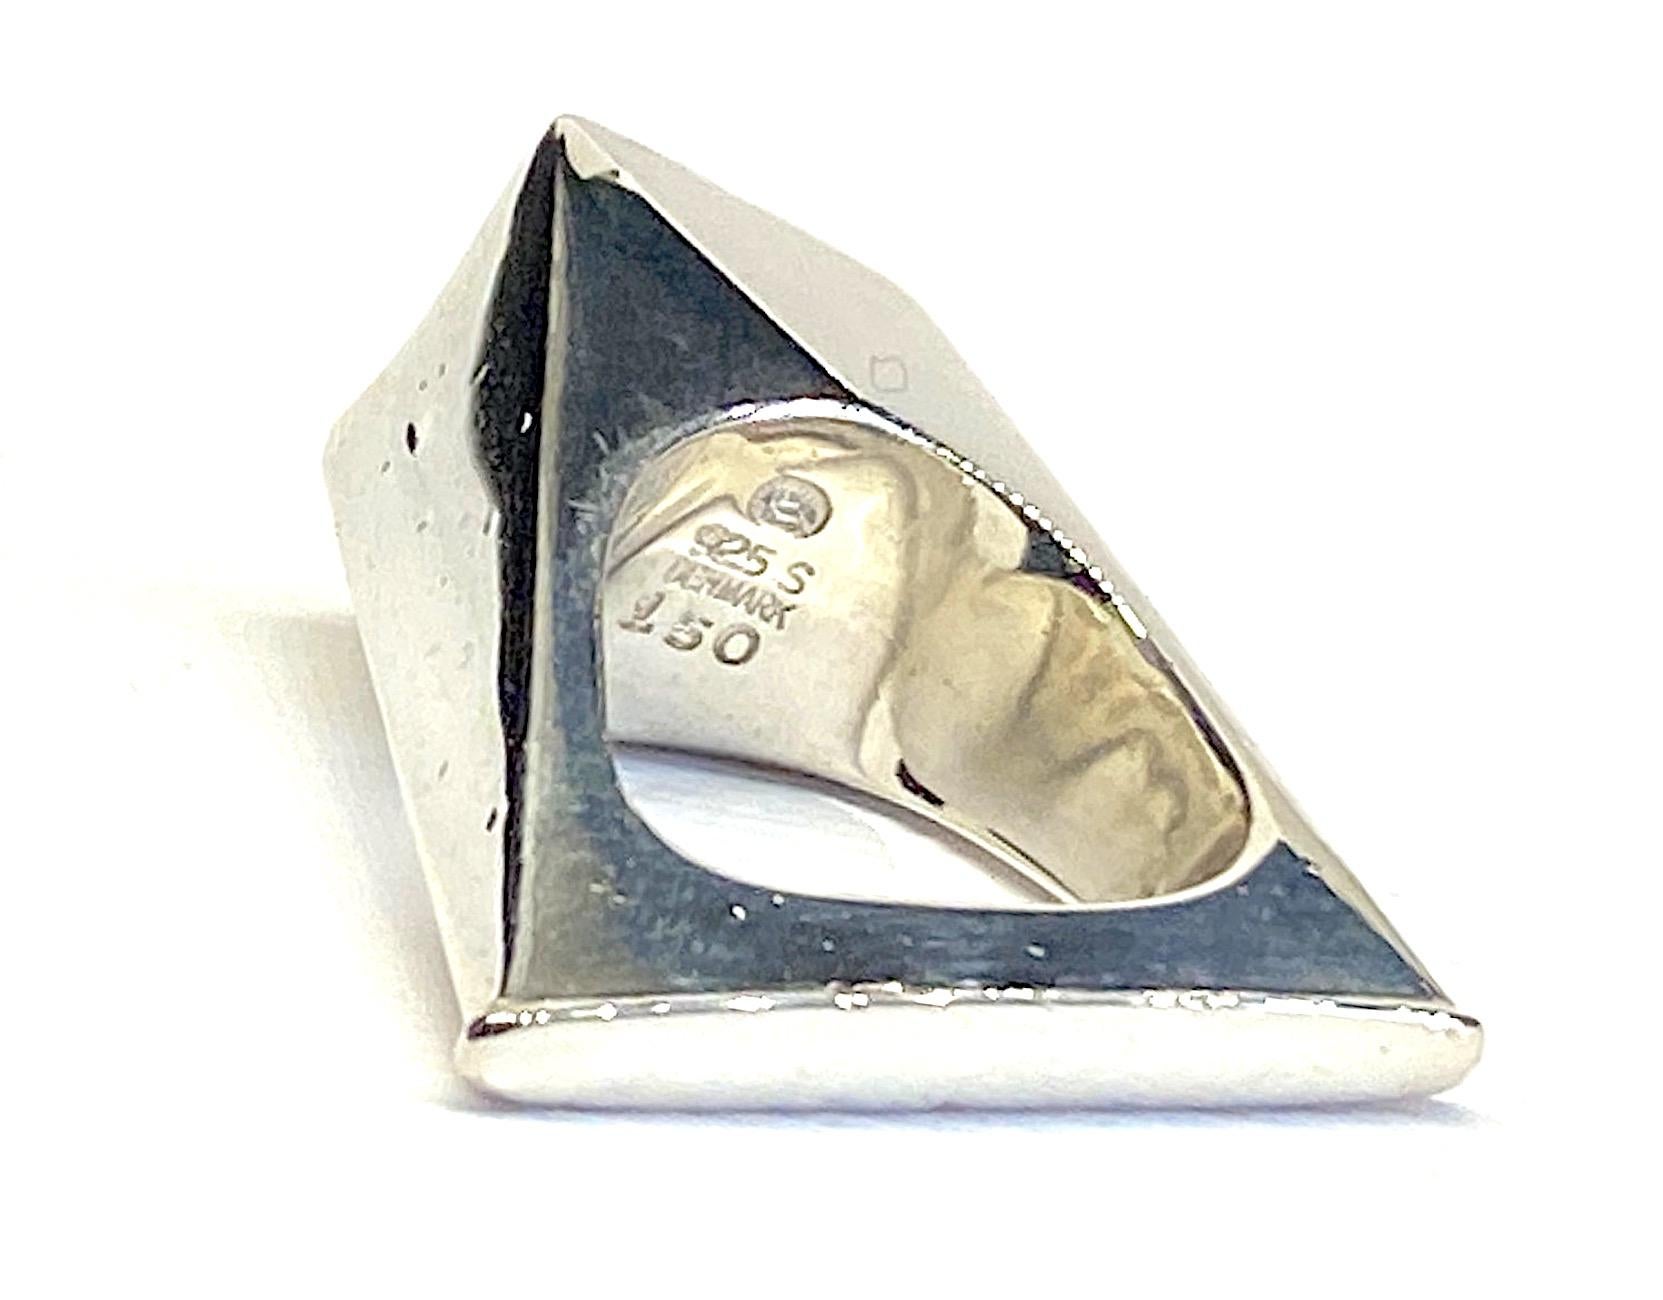 A rare and sculptural design 1960s Georg Jensen sterling silver ring by Sweden's formost woman silversmith Vivianna Torun, nee Torun Bülow-Hübe. It is model no. 150 and made in a cast abstract and asymmetric design. The top is .5 of an inch wide and